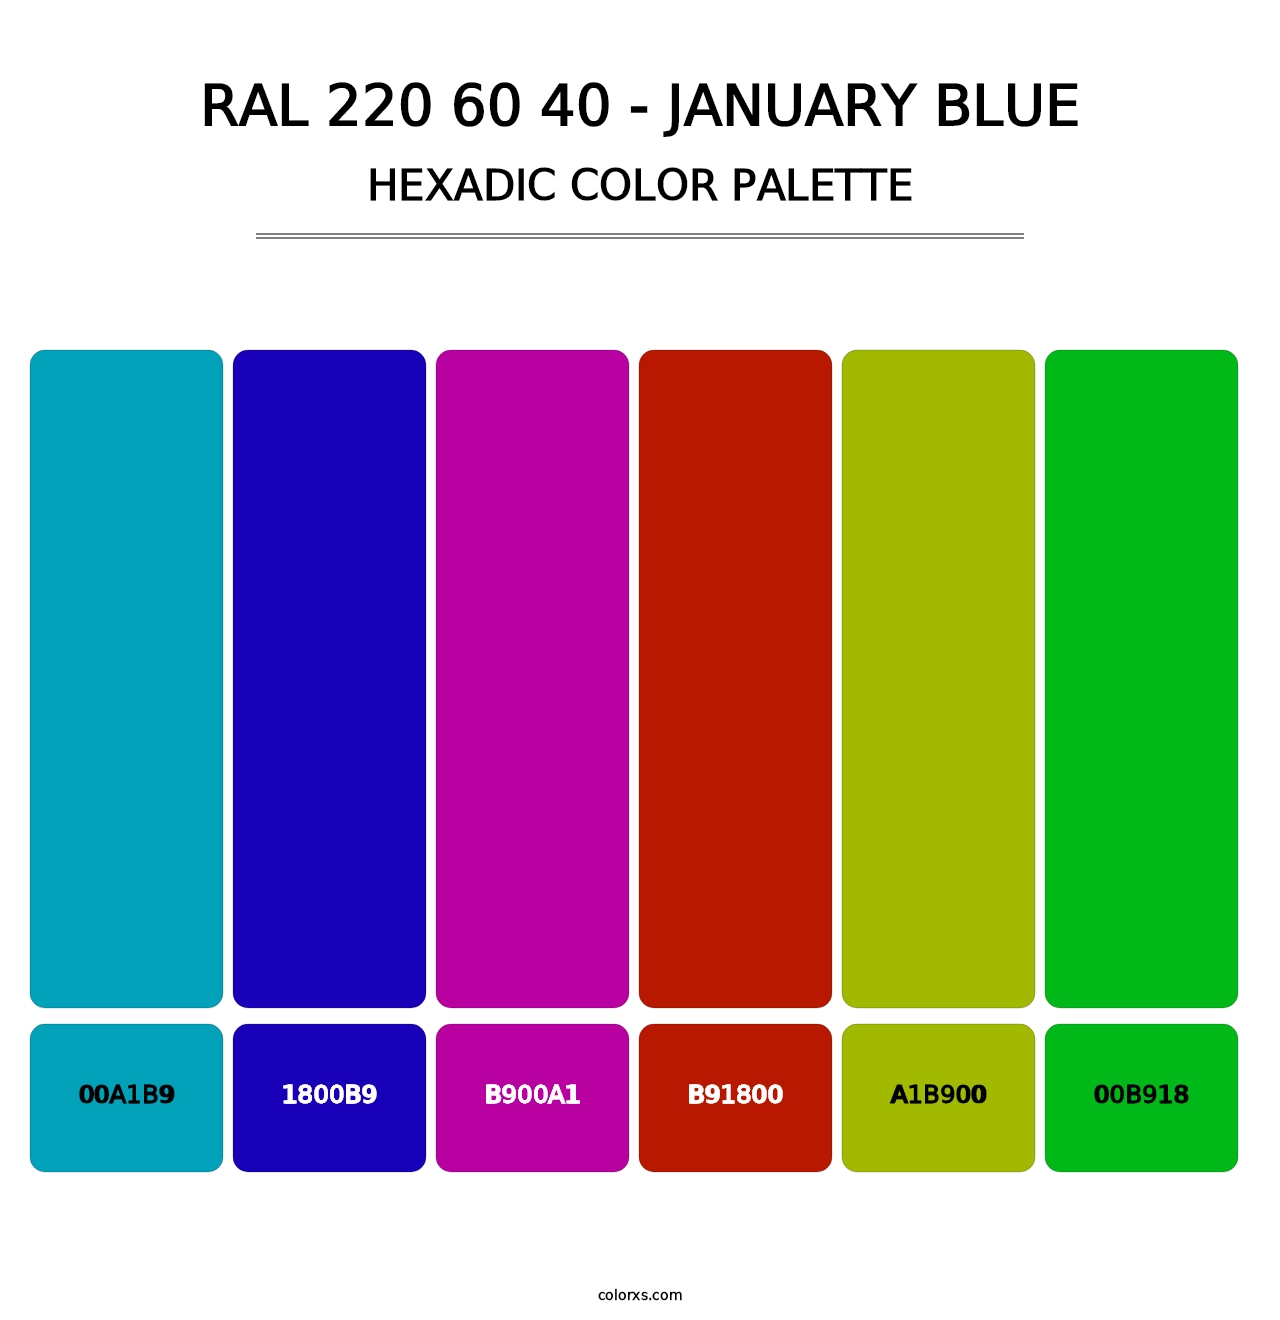 RAL 220 60 40 - January Blue - Hexadic Color Palette